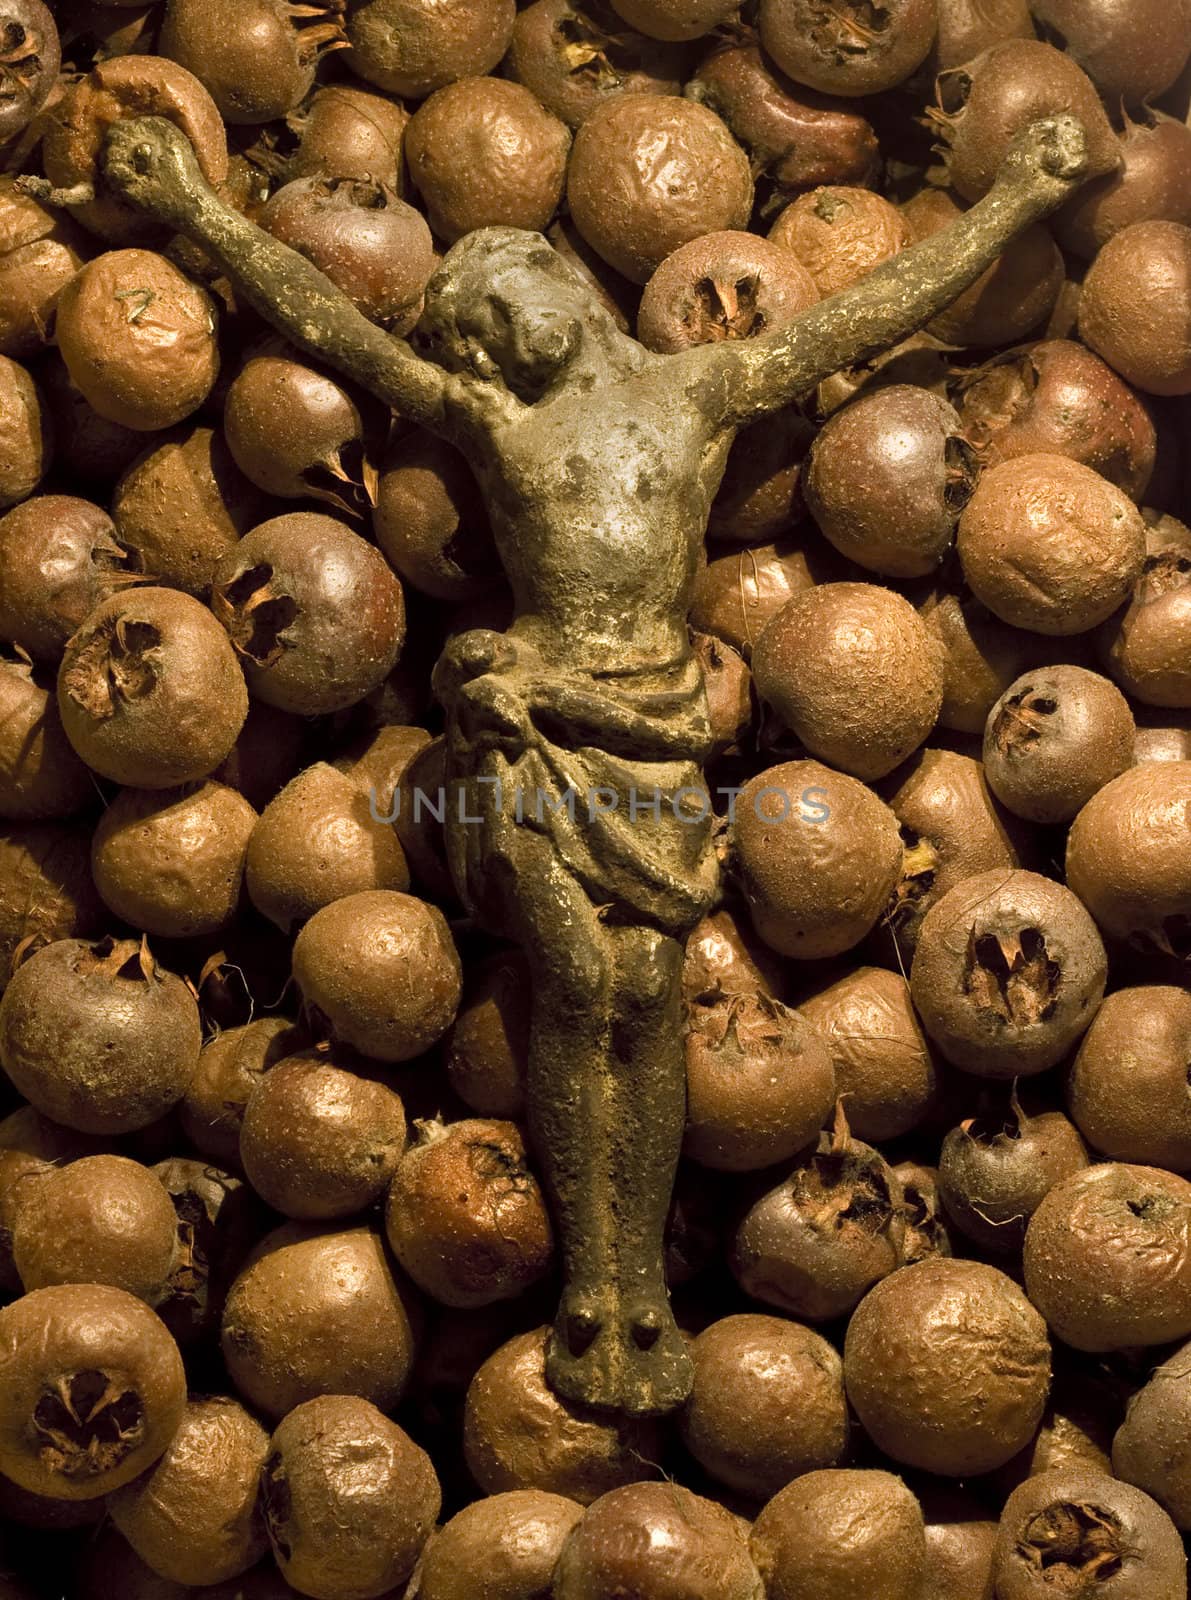 Crucifix lying on a bed of medlar fruits by domencolja